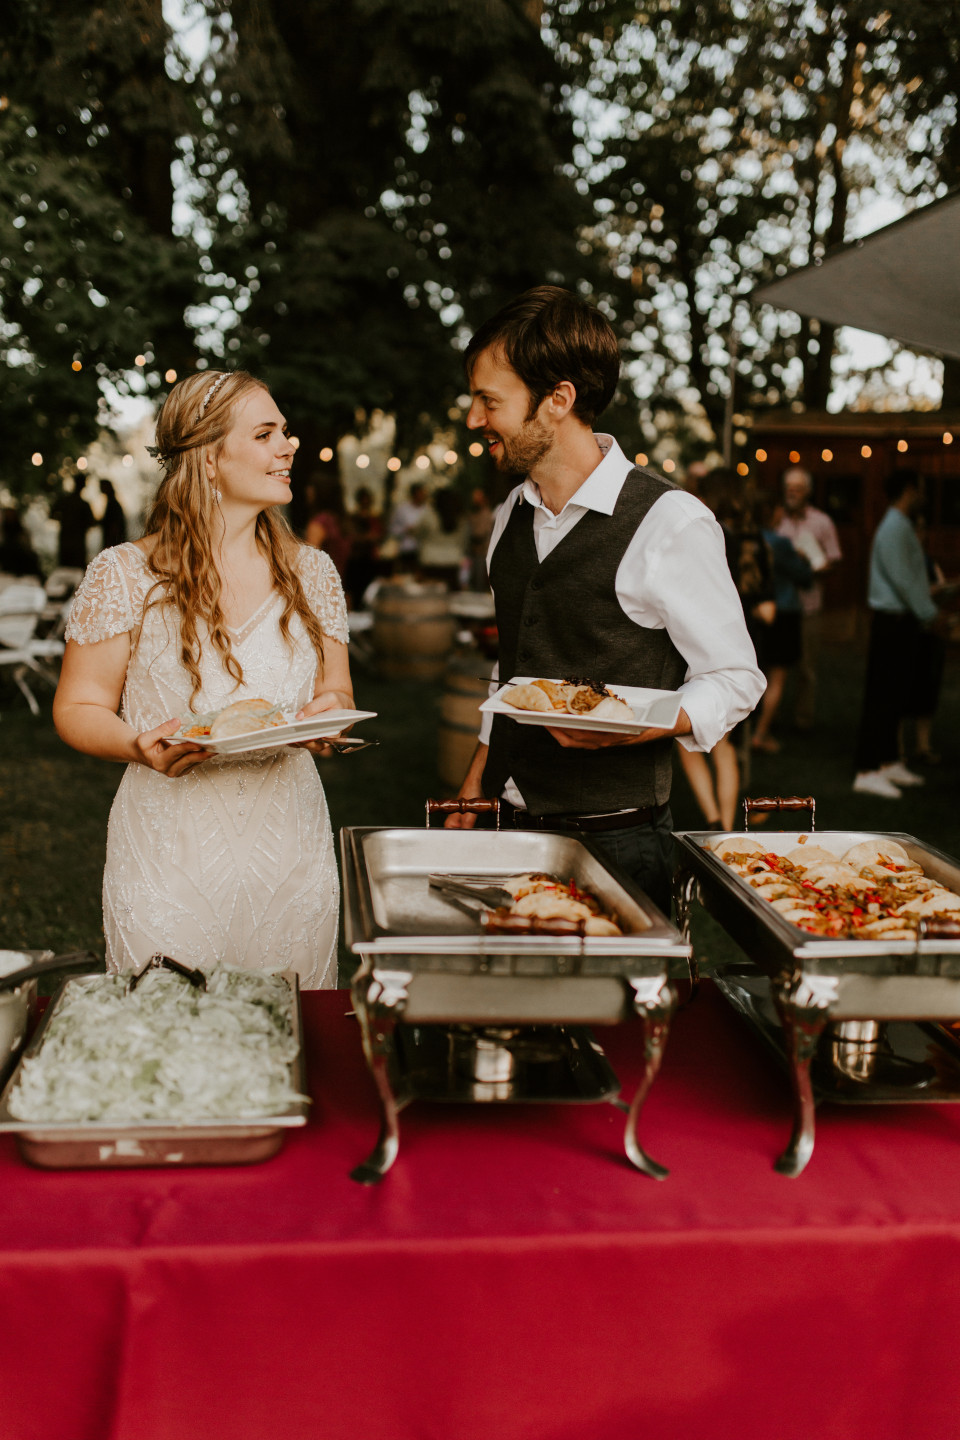 Hannah and Dan serving themselves food in Corvallis, Oregon. Intimate wedding photography in Corvallis Oregon by Sienna Plus Josh.